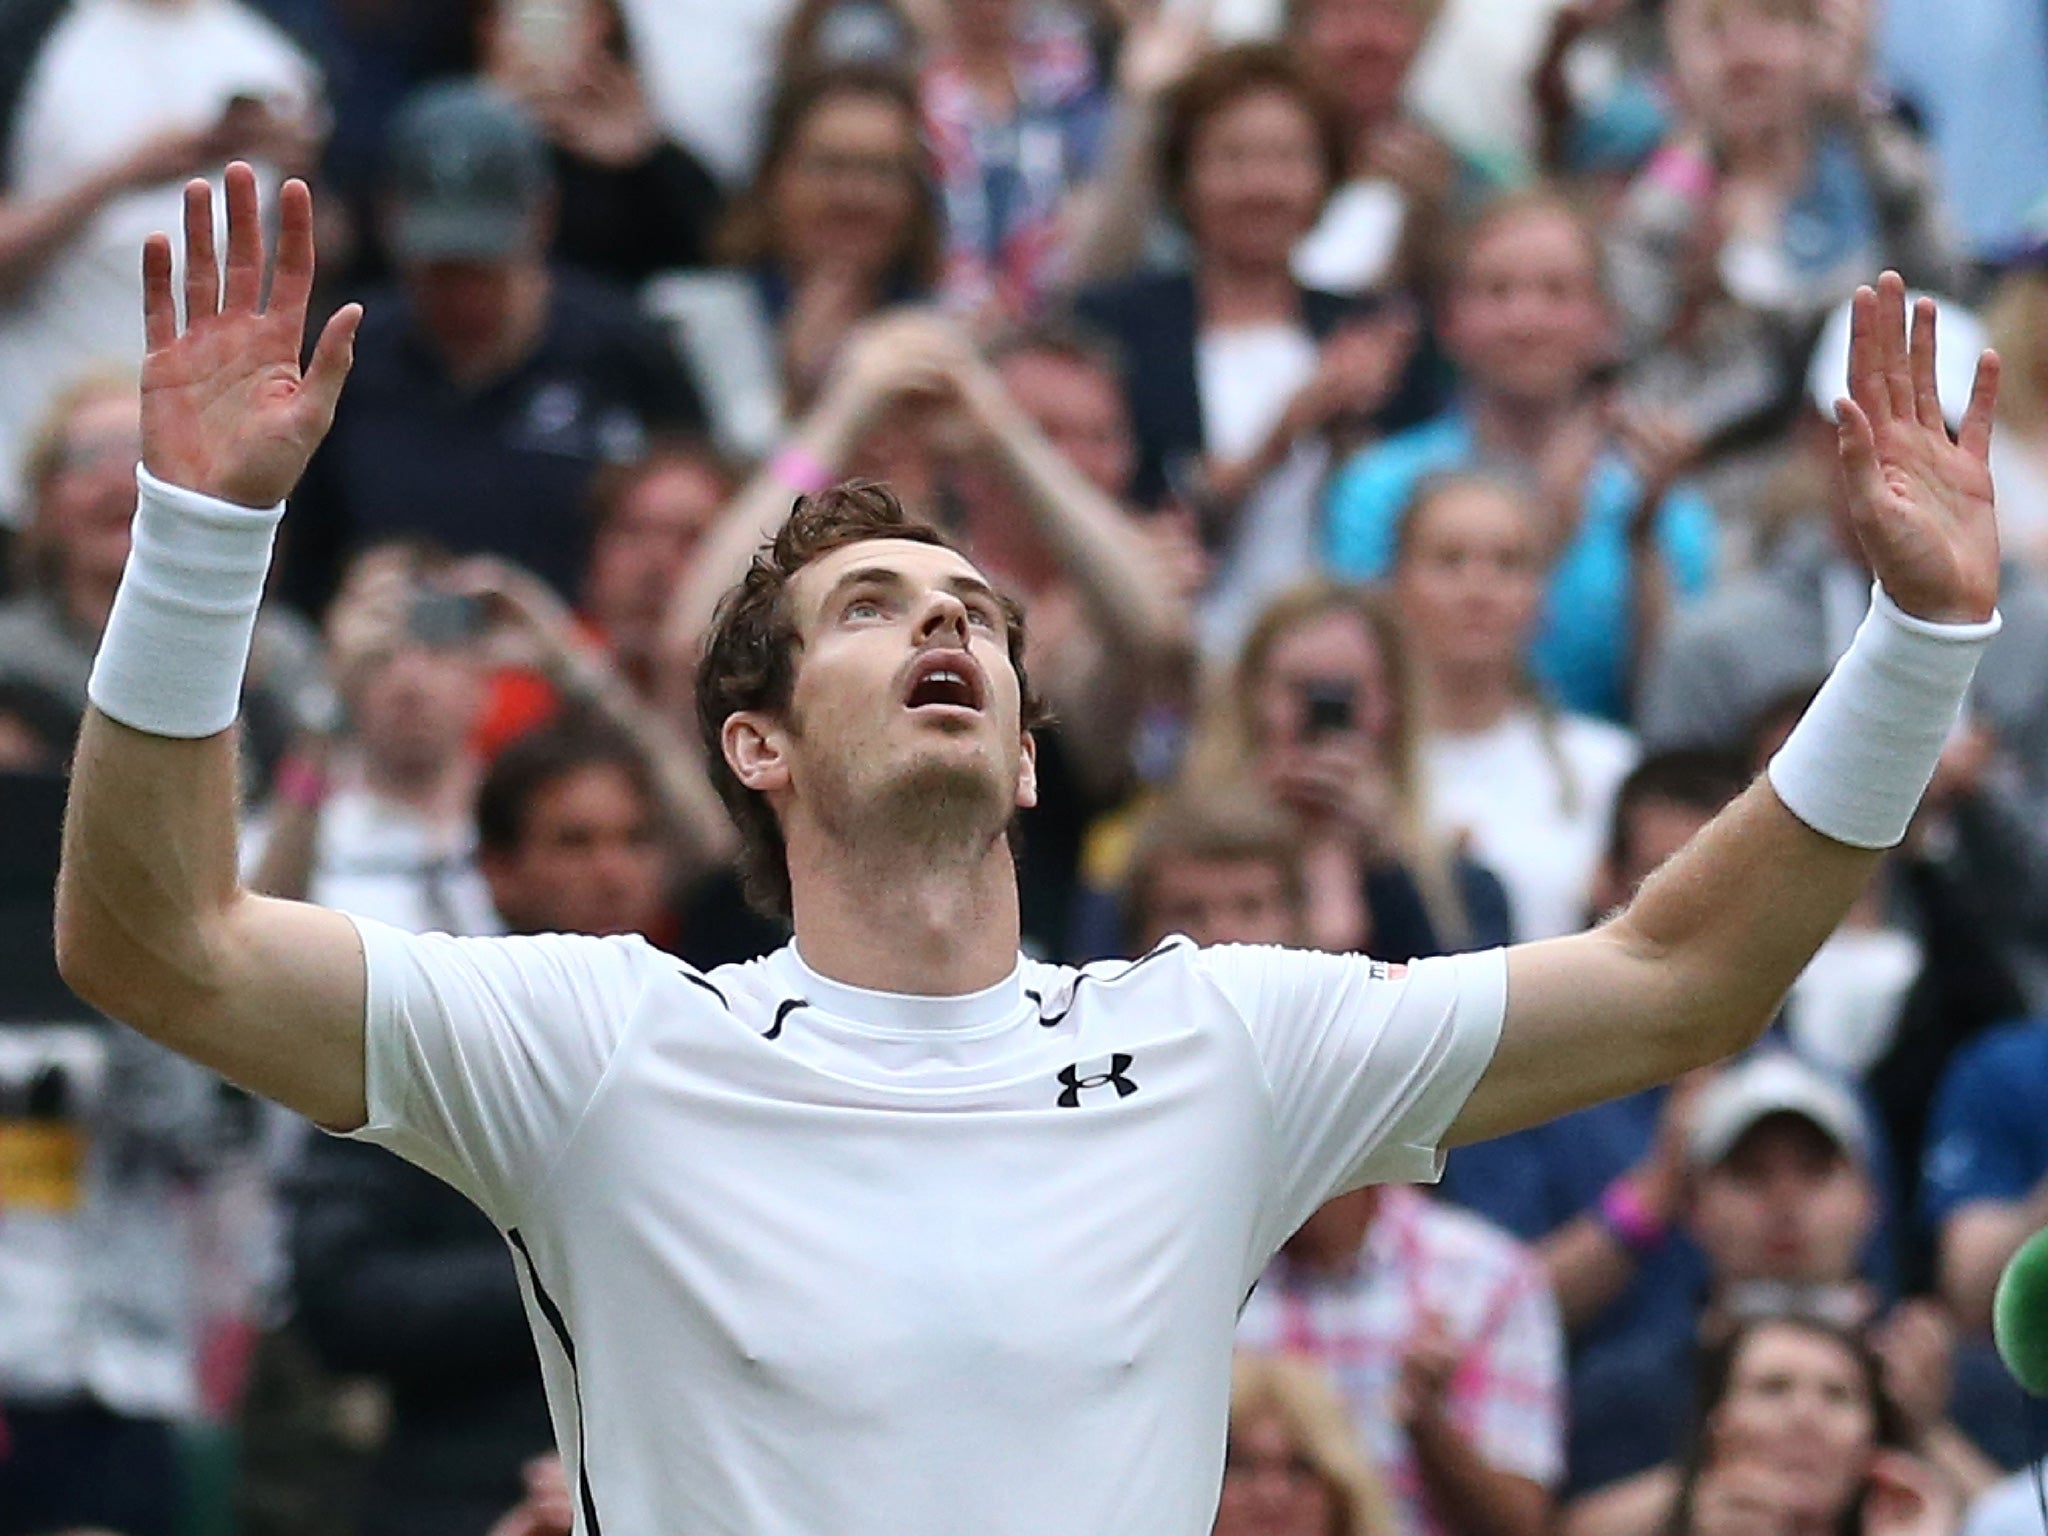 Murray celebrates his victory at the end of the match